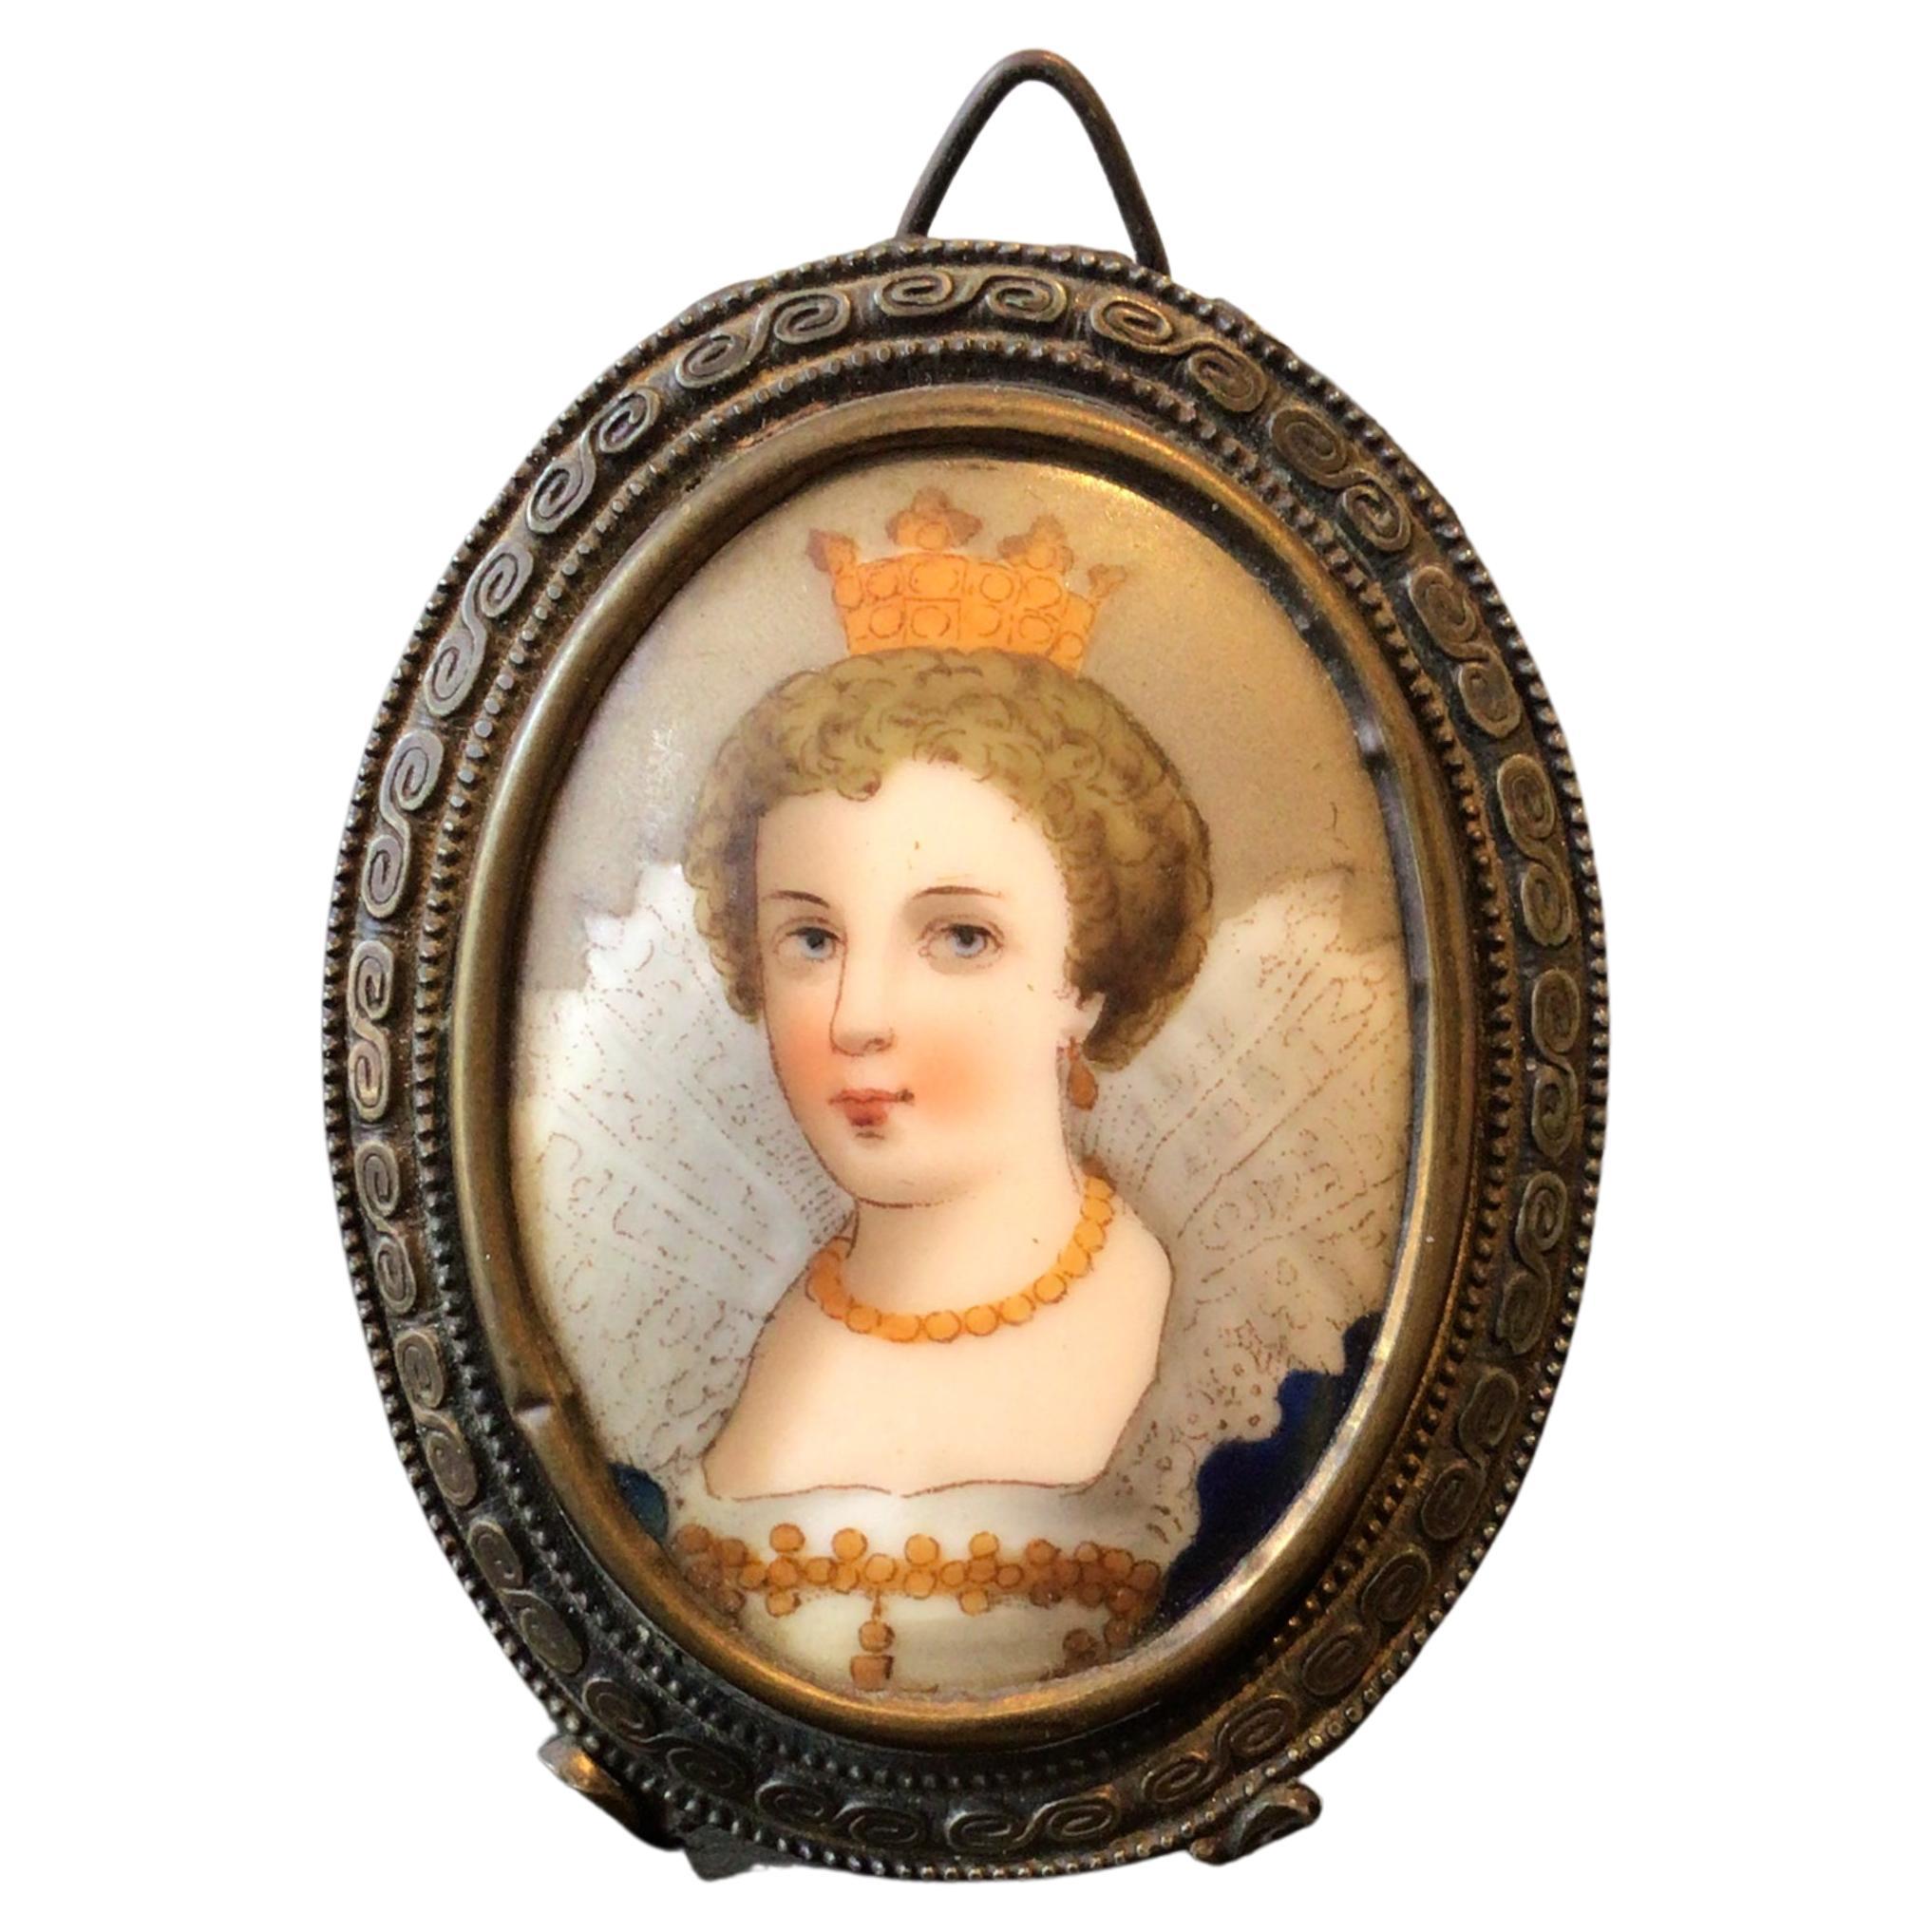 1890s Miniature Painting of Queen on Ceramic in Brass Frame